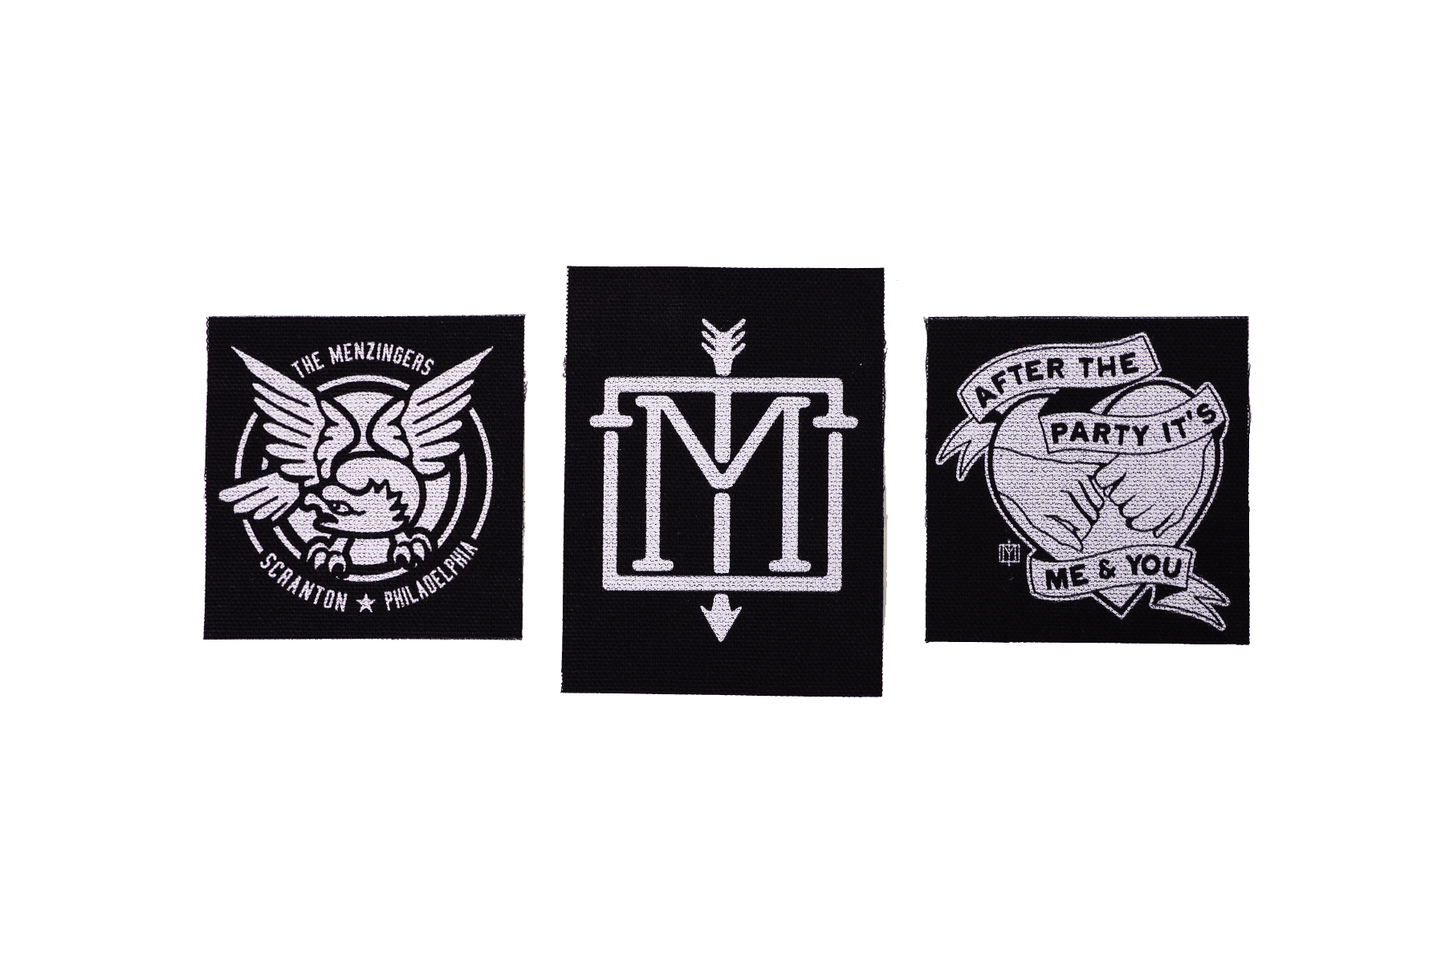 PRESALE: After The Party It's Me And You Canvas Patch • The Menzingers x Oxford Pennant